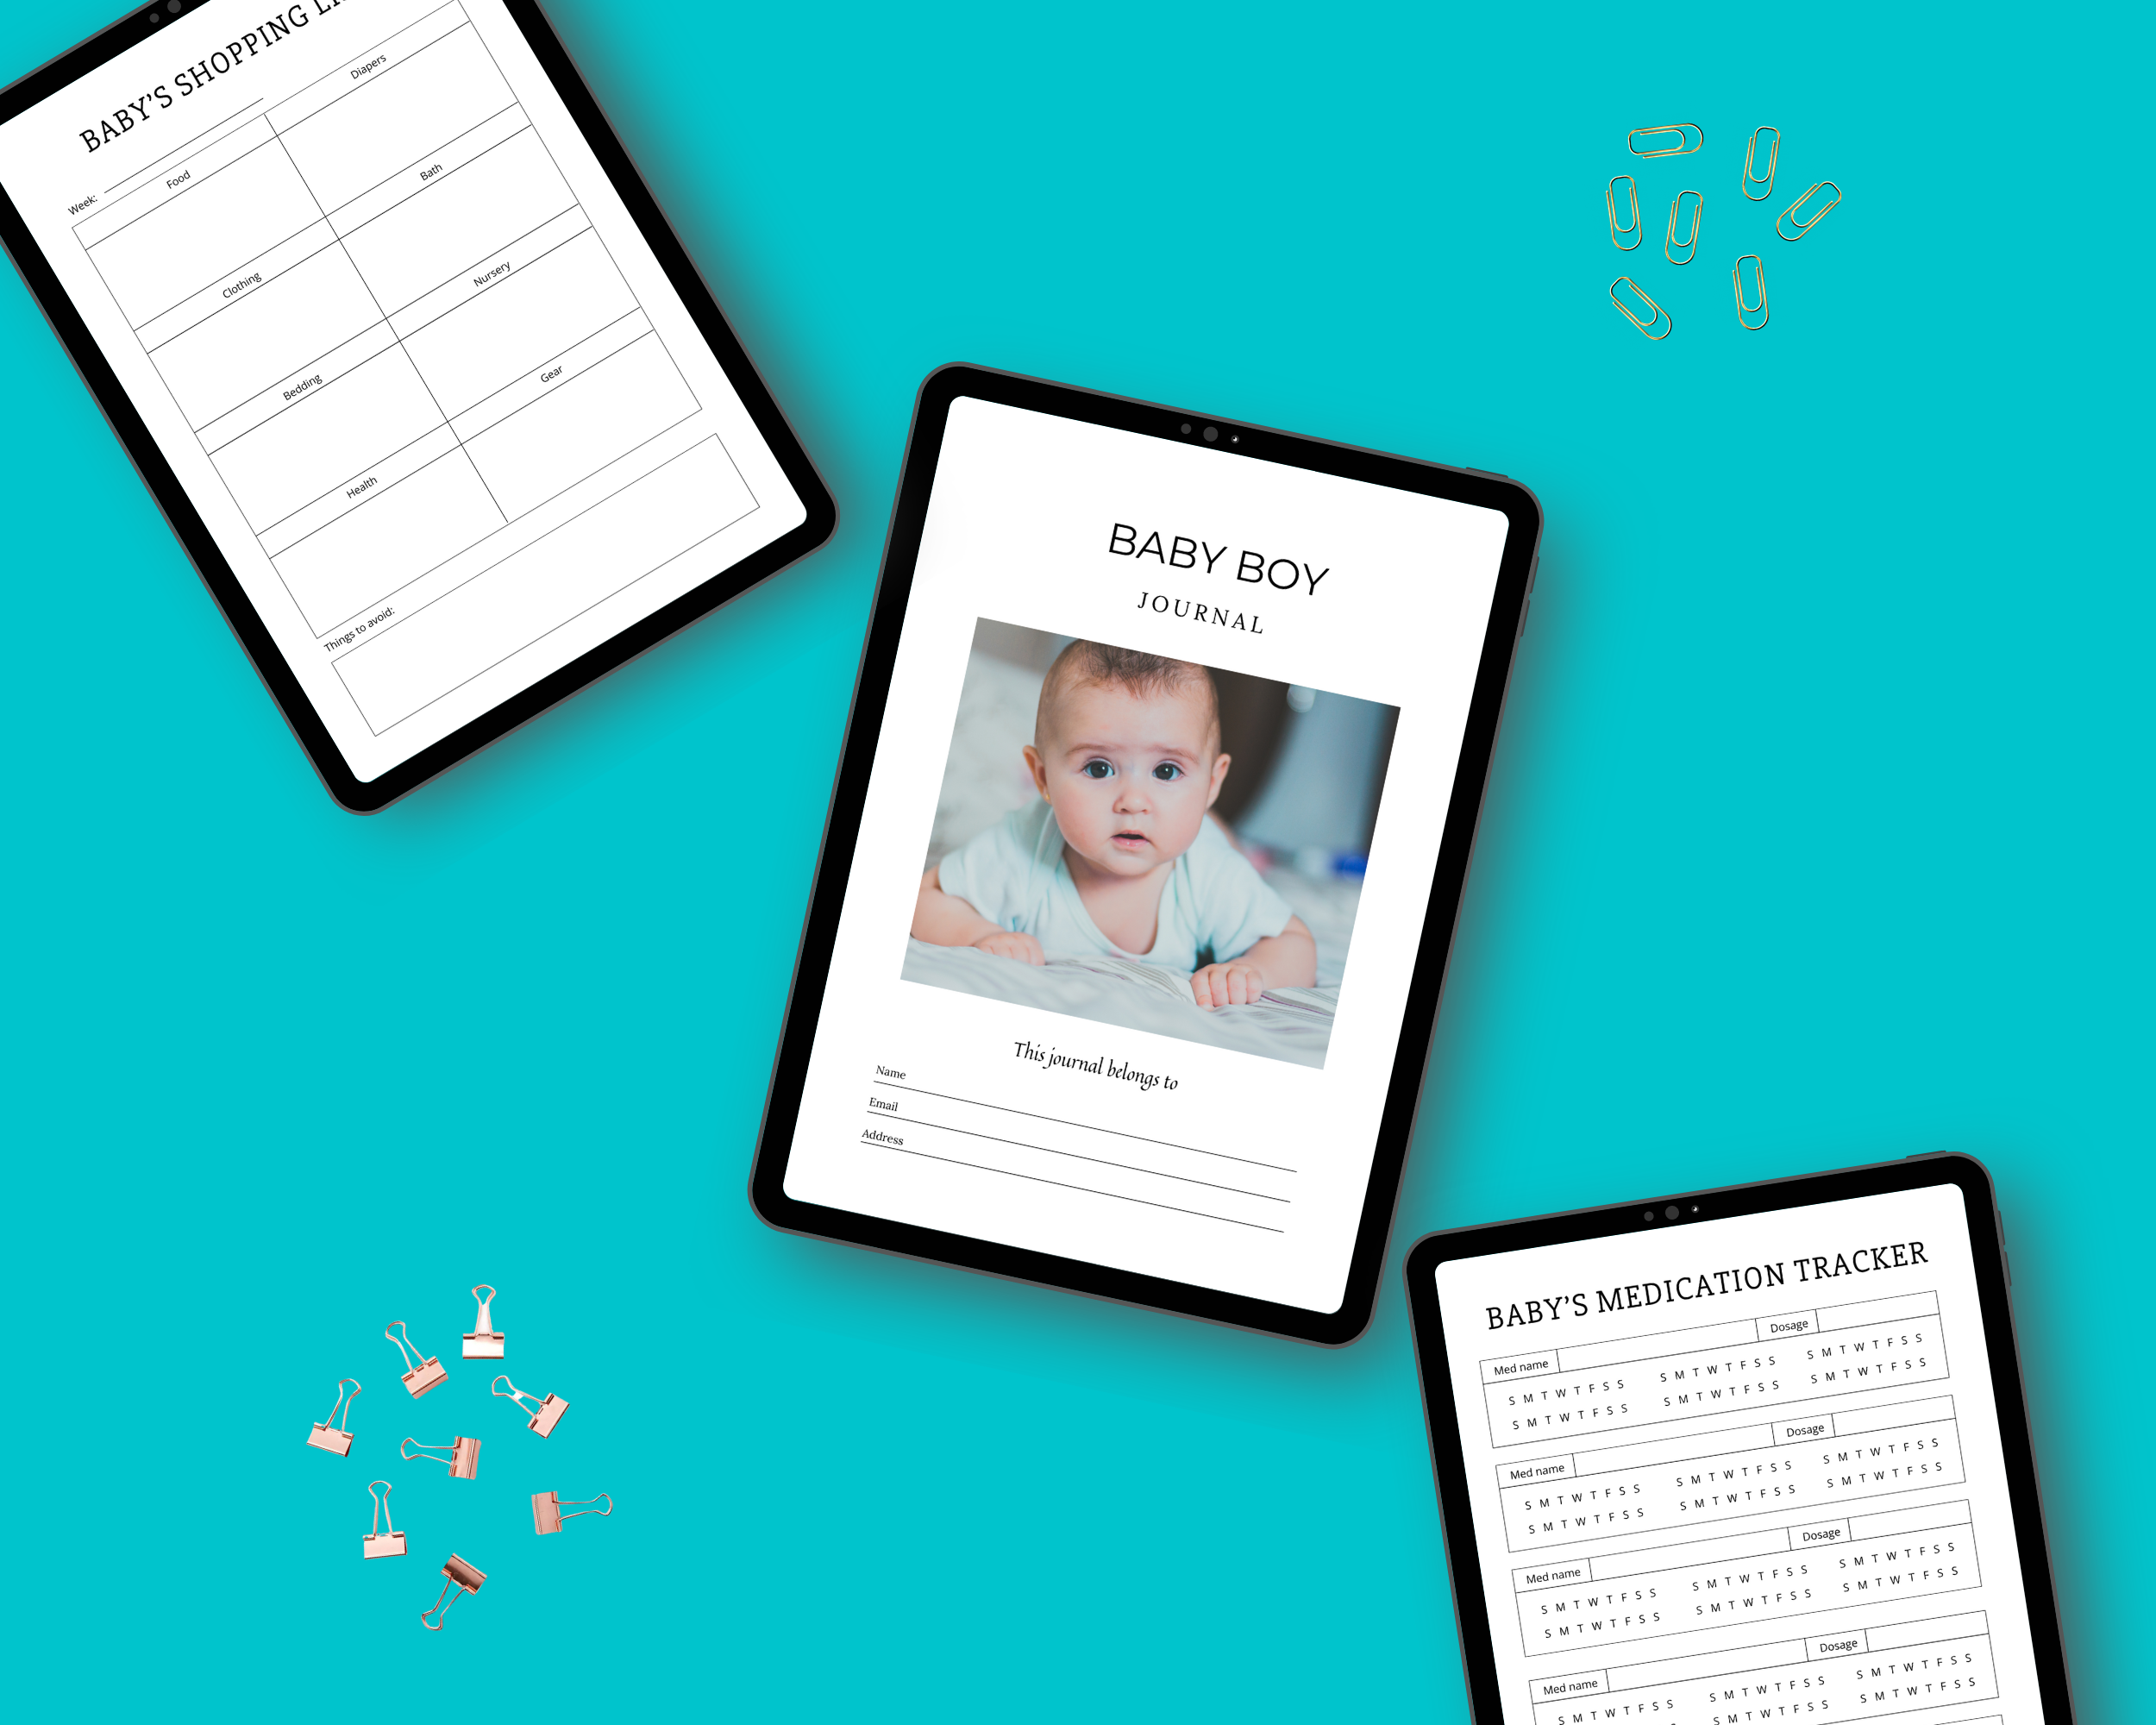 Editable Baby Boy Planner Templates in Canva | Commercial Use